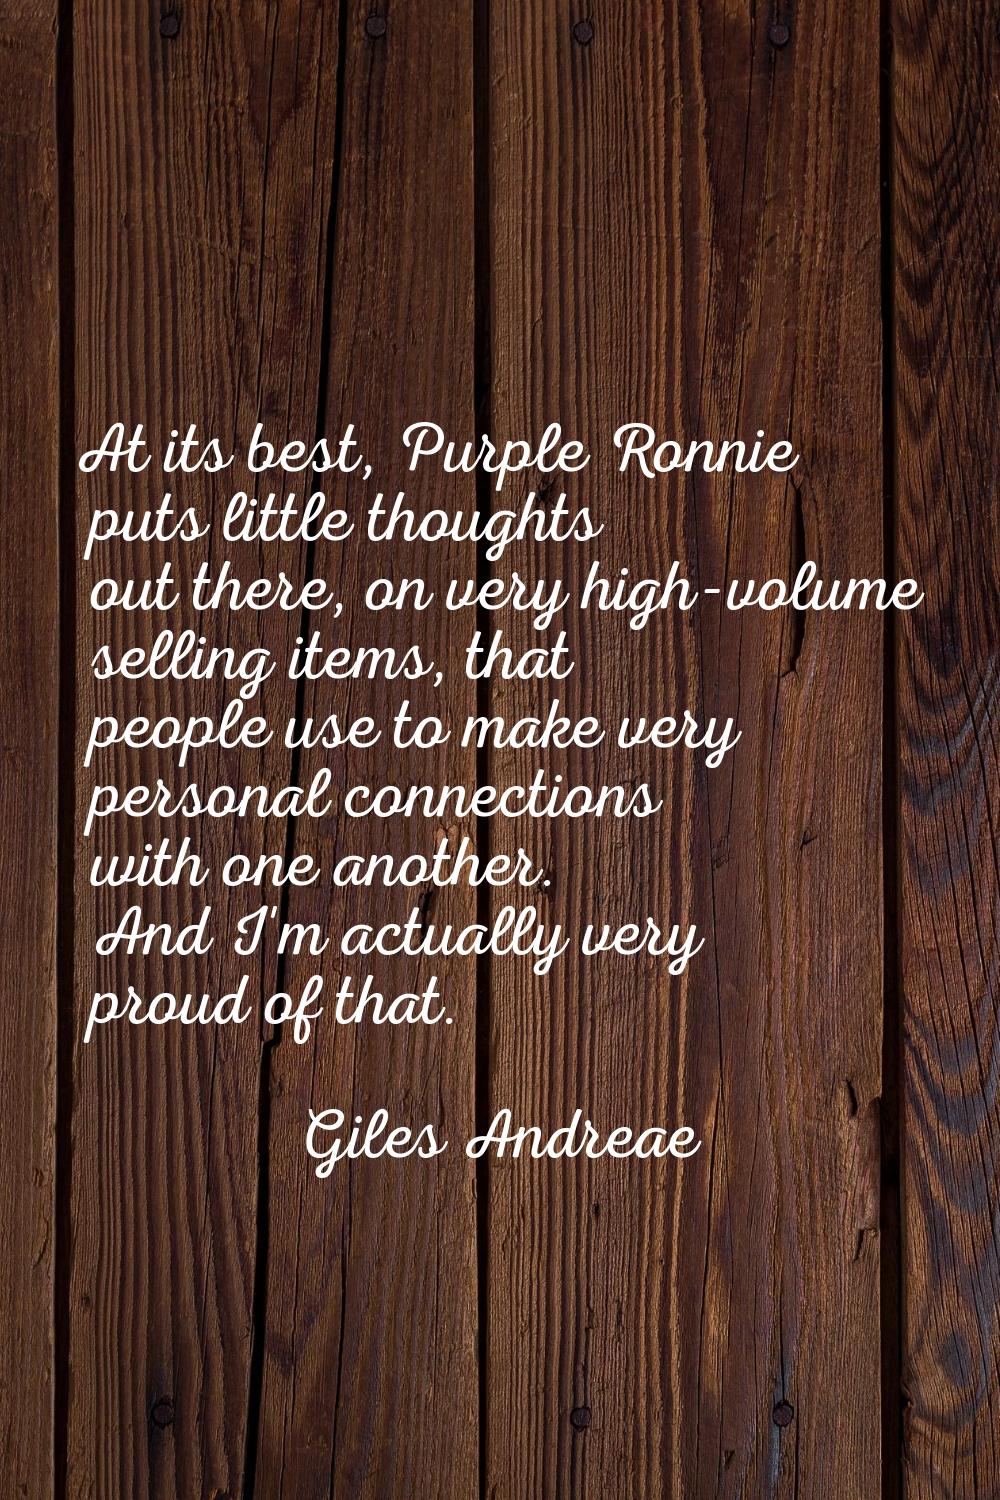 At its best, Purple Ronnie puts little thoughts out there, on very high-volume selling items, that 